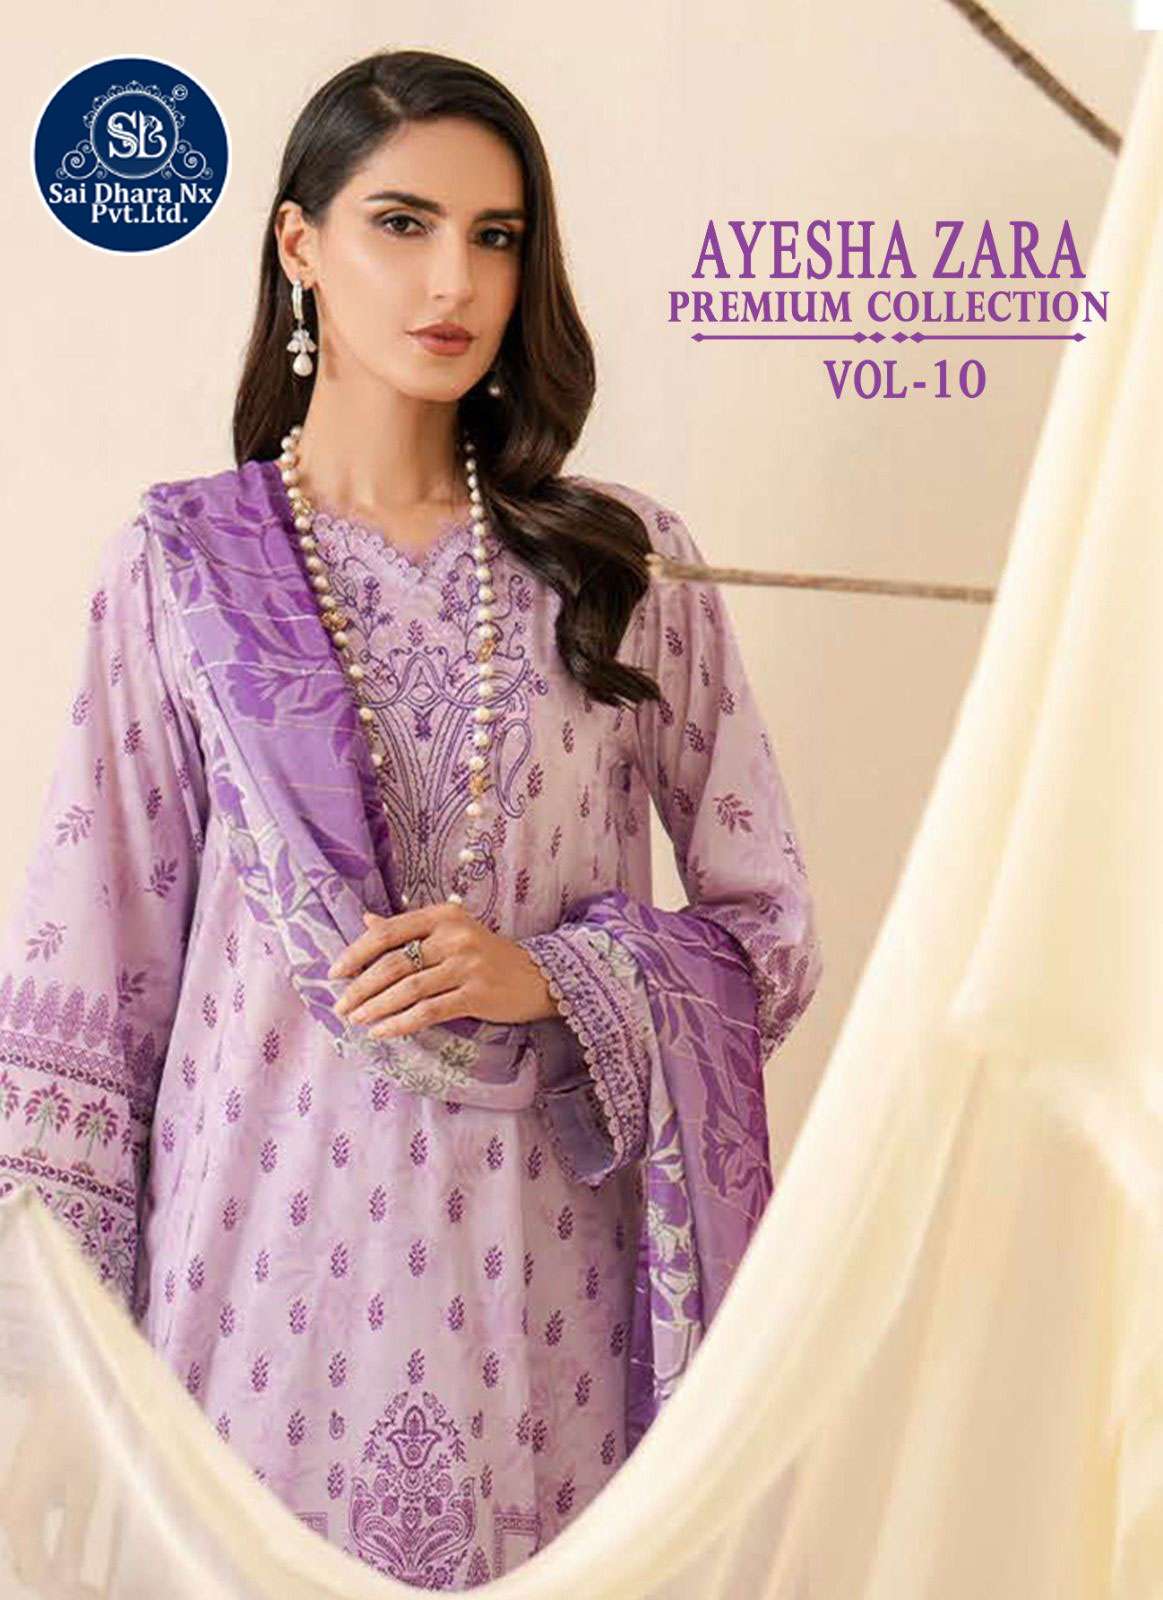 SHREE FABRIC PRESENTS PURE COTTON PRINT WITH EXCLUSIVE EMBROIDERY 3 PIECE SUIT PAKISTANI DRESS MATERIAL  WHOLESALE SHOP IN SURAT - SaiDharaNx